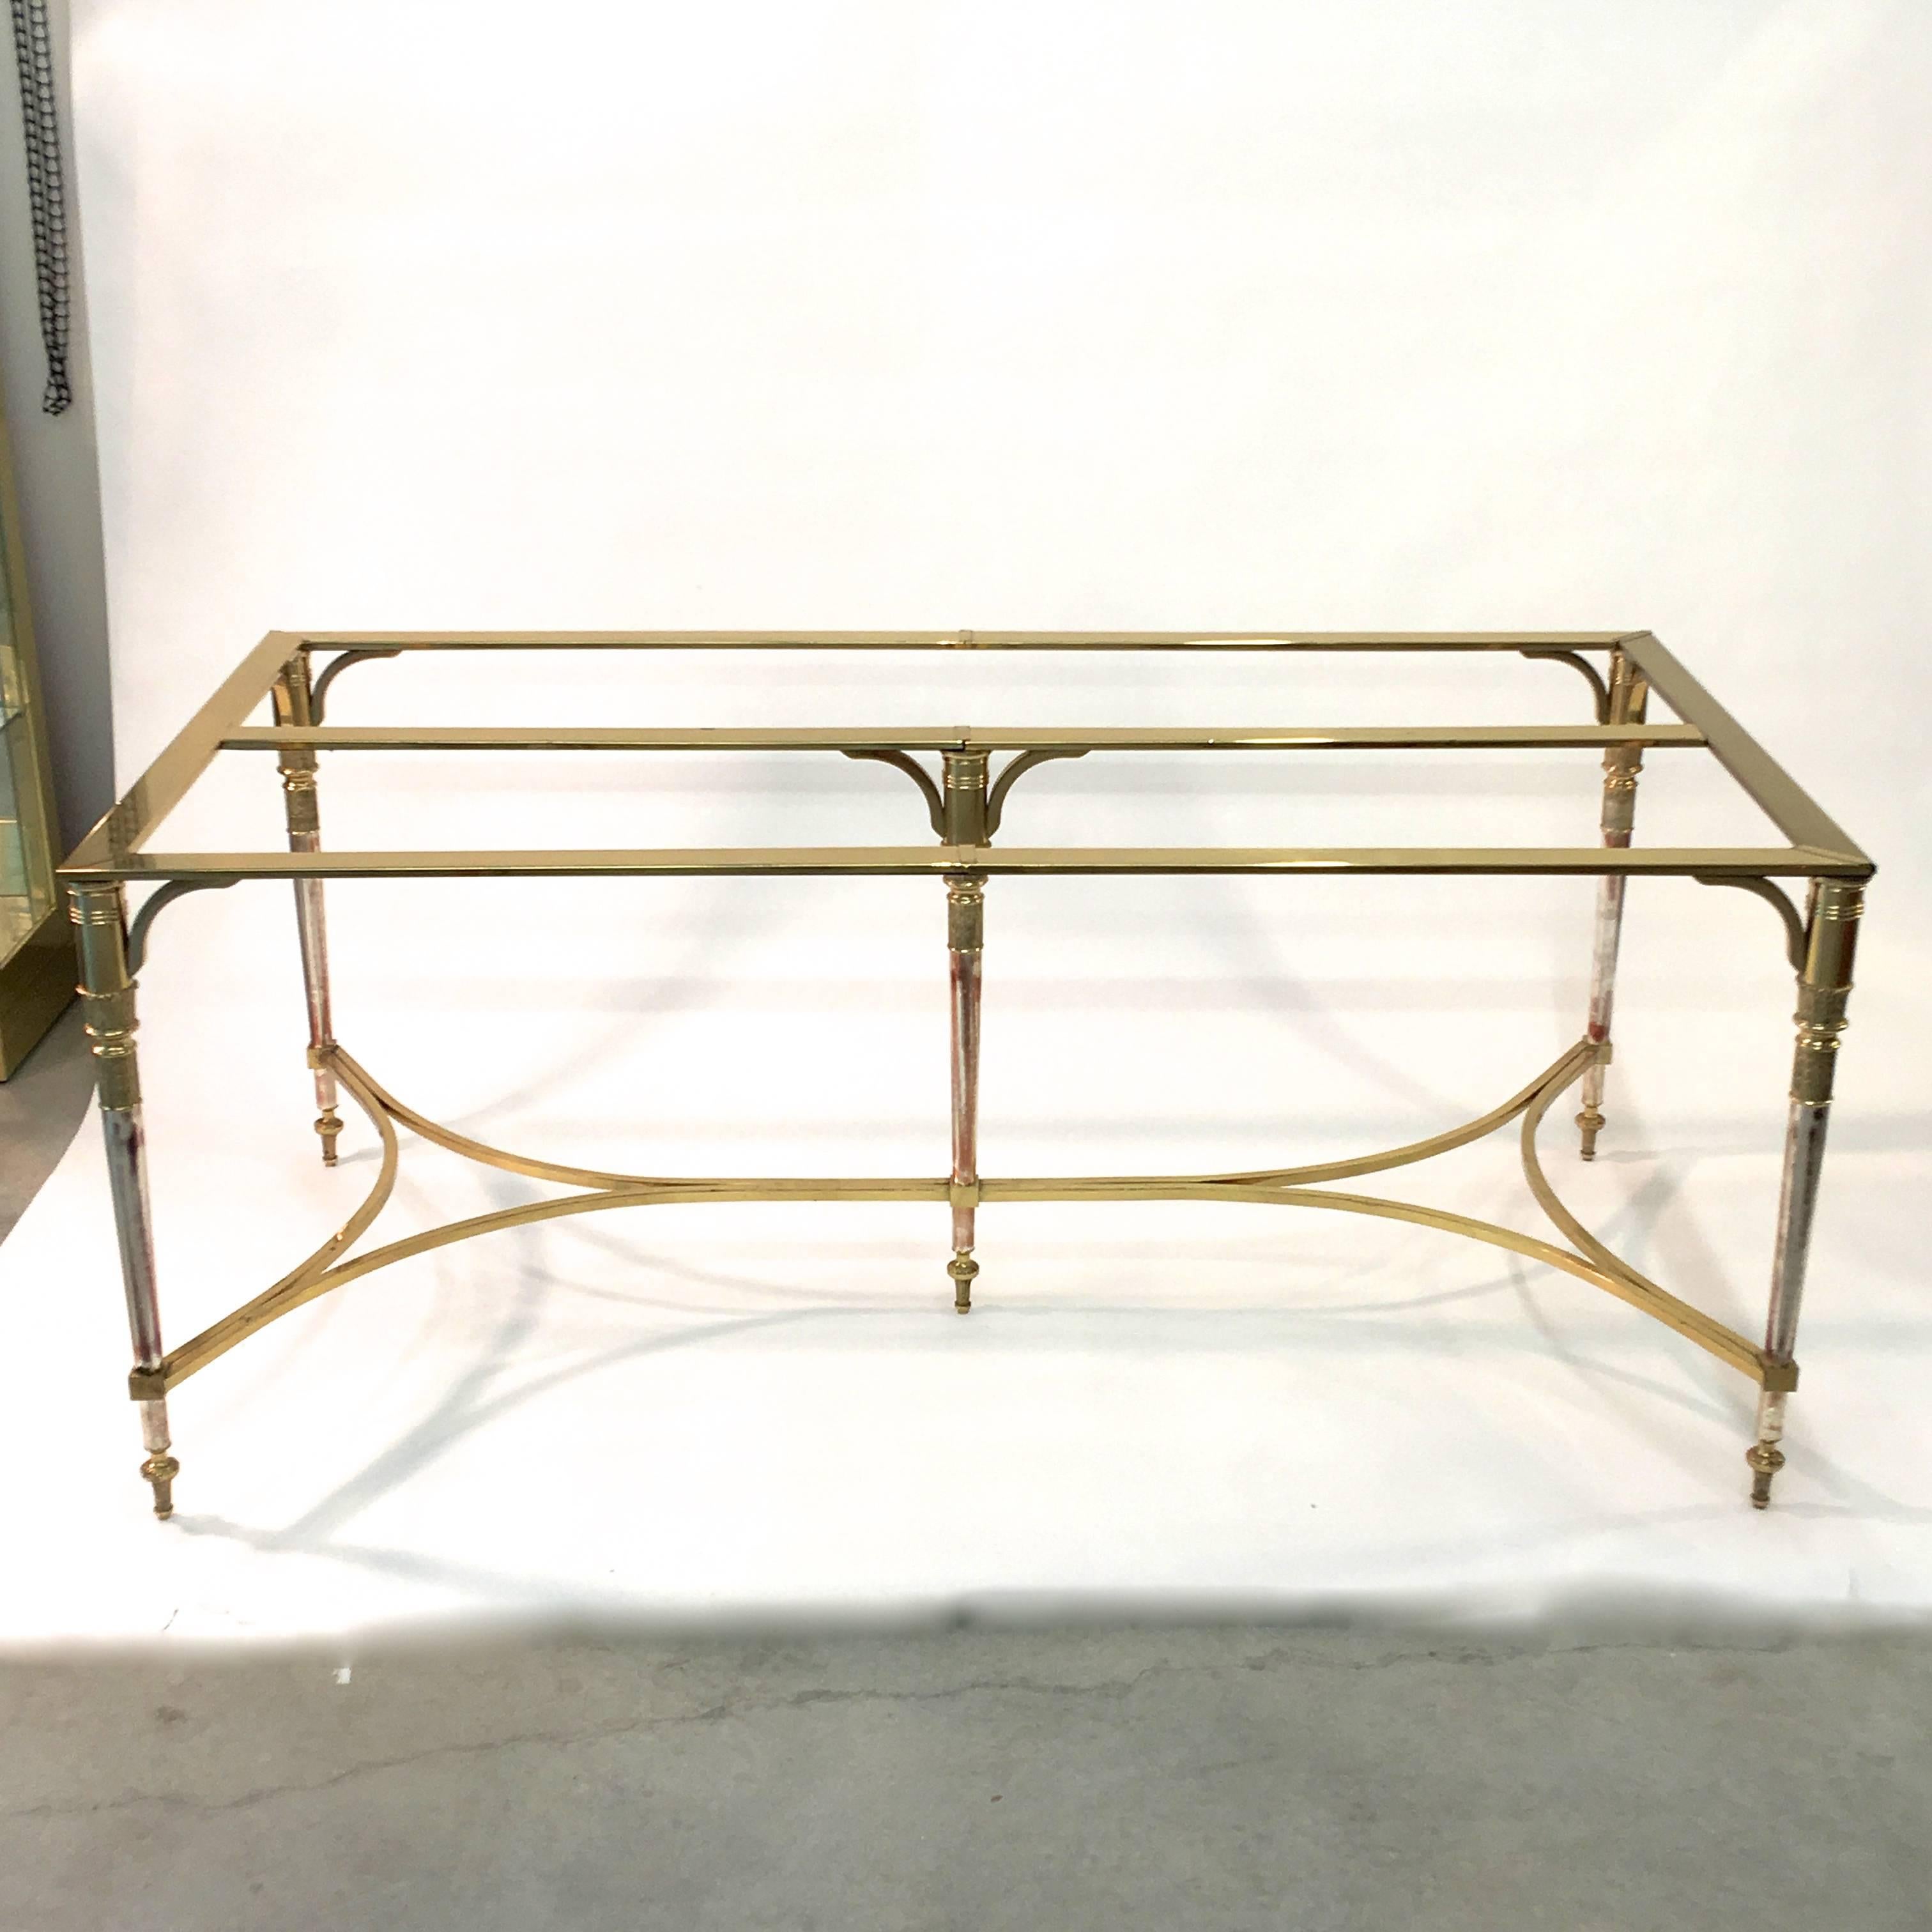 Incredibly well made neoclassical style rectangular five leg dining table made of solid brass and polished steel. The legs are tapered and are made of solid brass and polished steel. The cross stretchers are solid brass square bar. The top frame